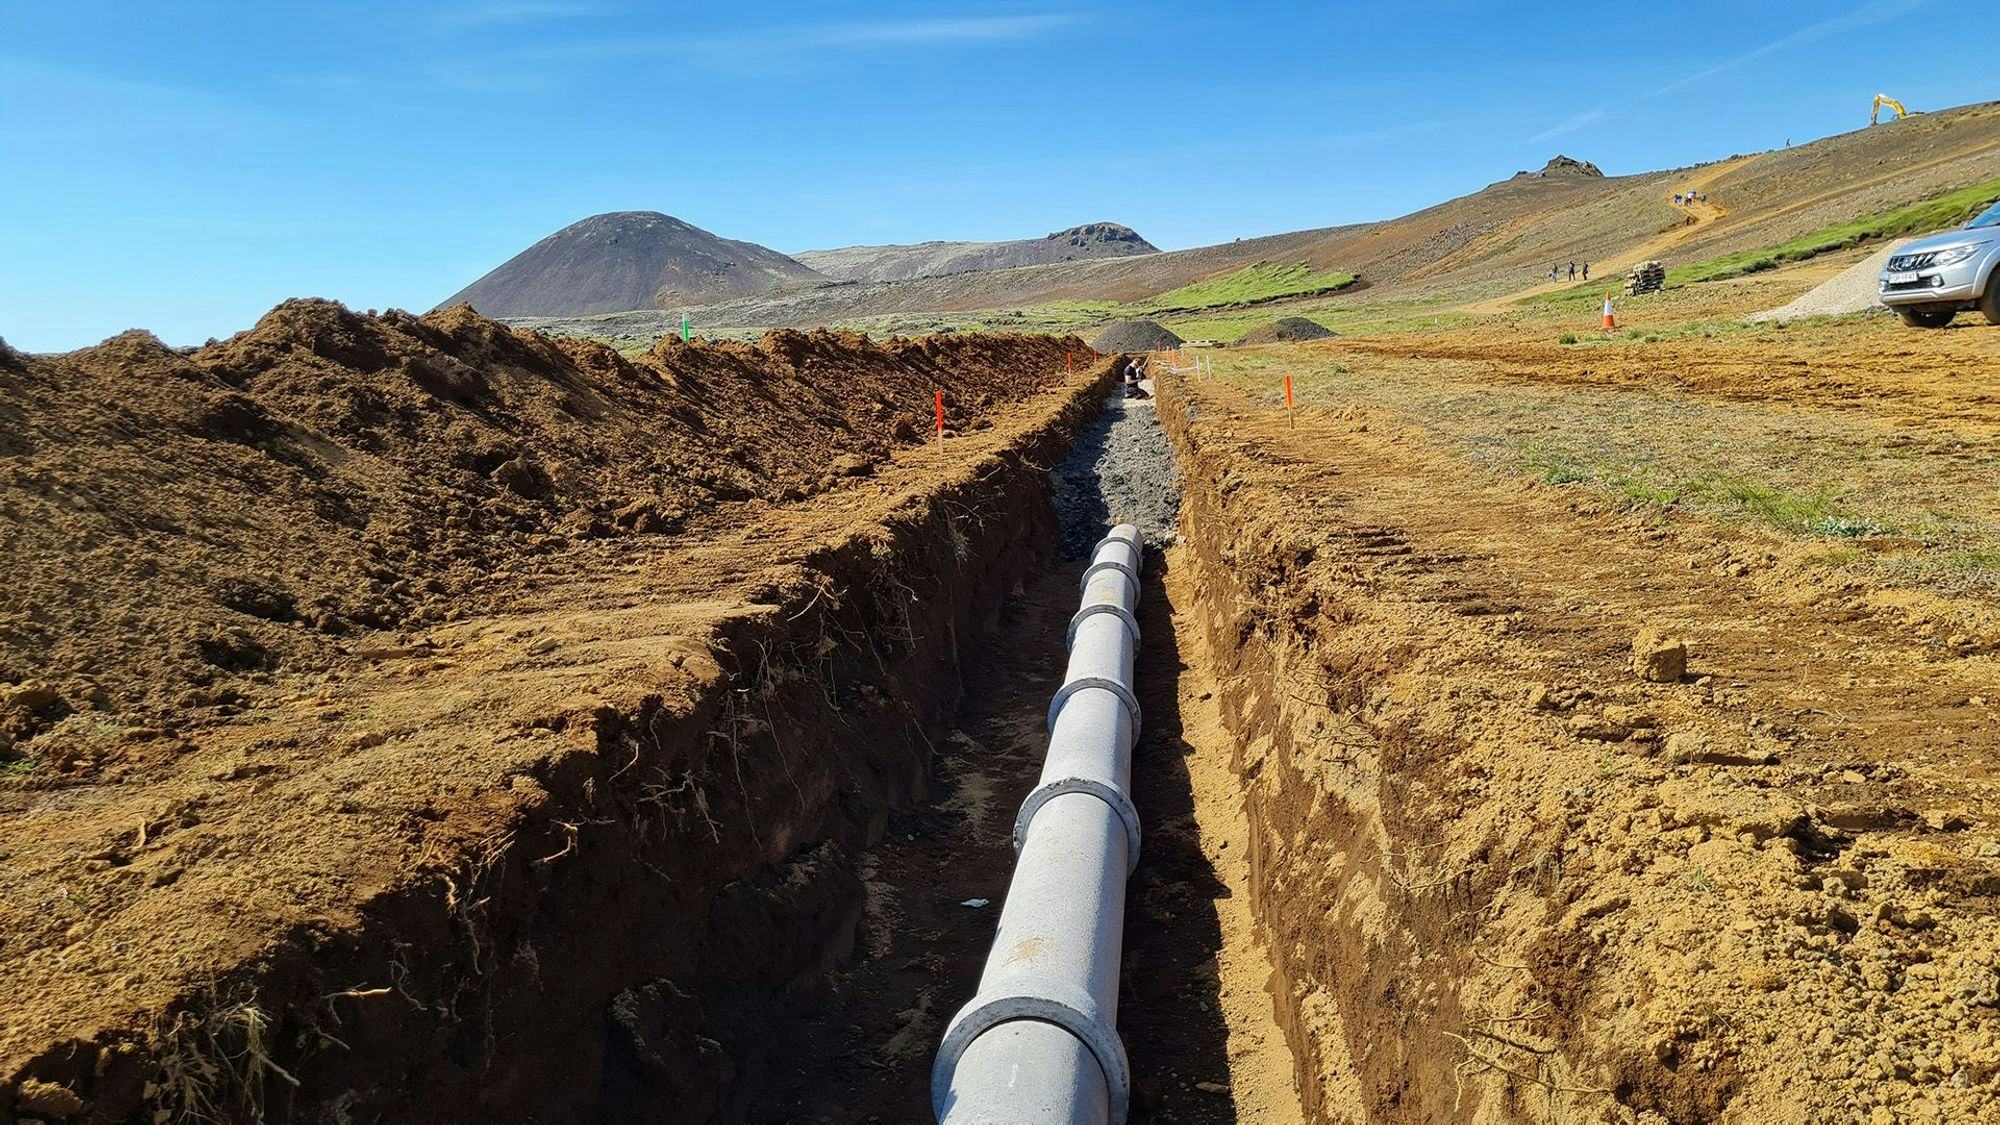 A long trench with a newly installed large white pipe